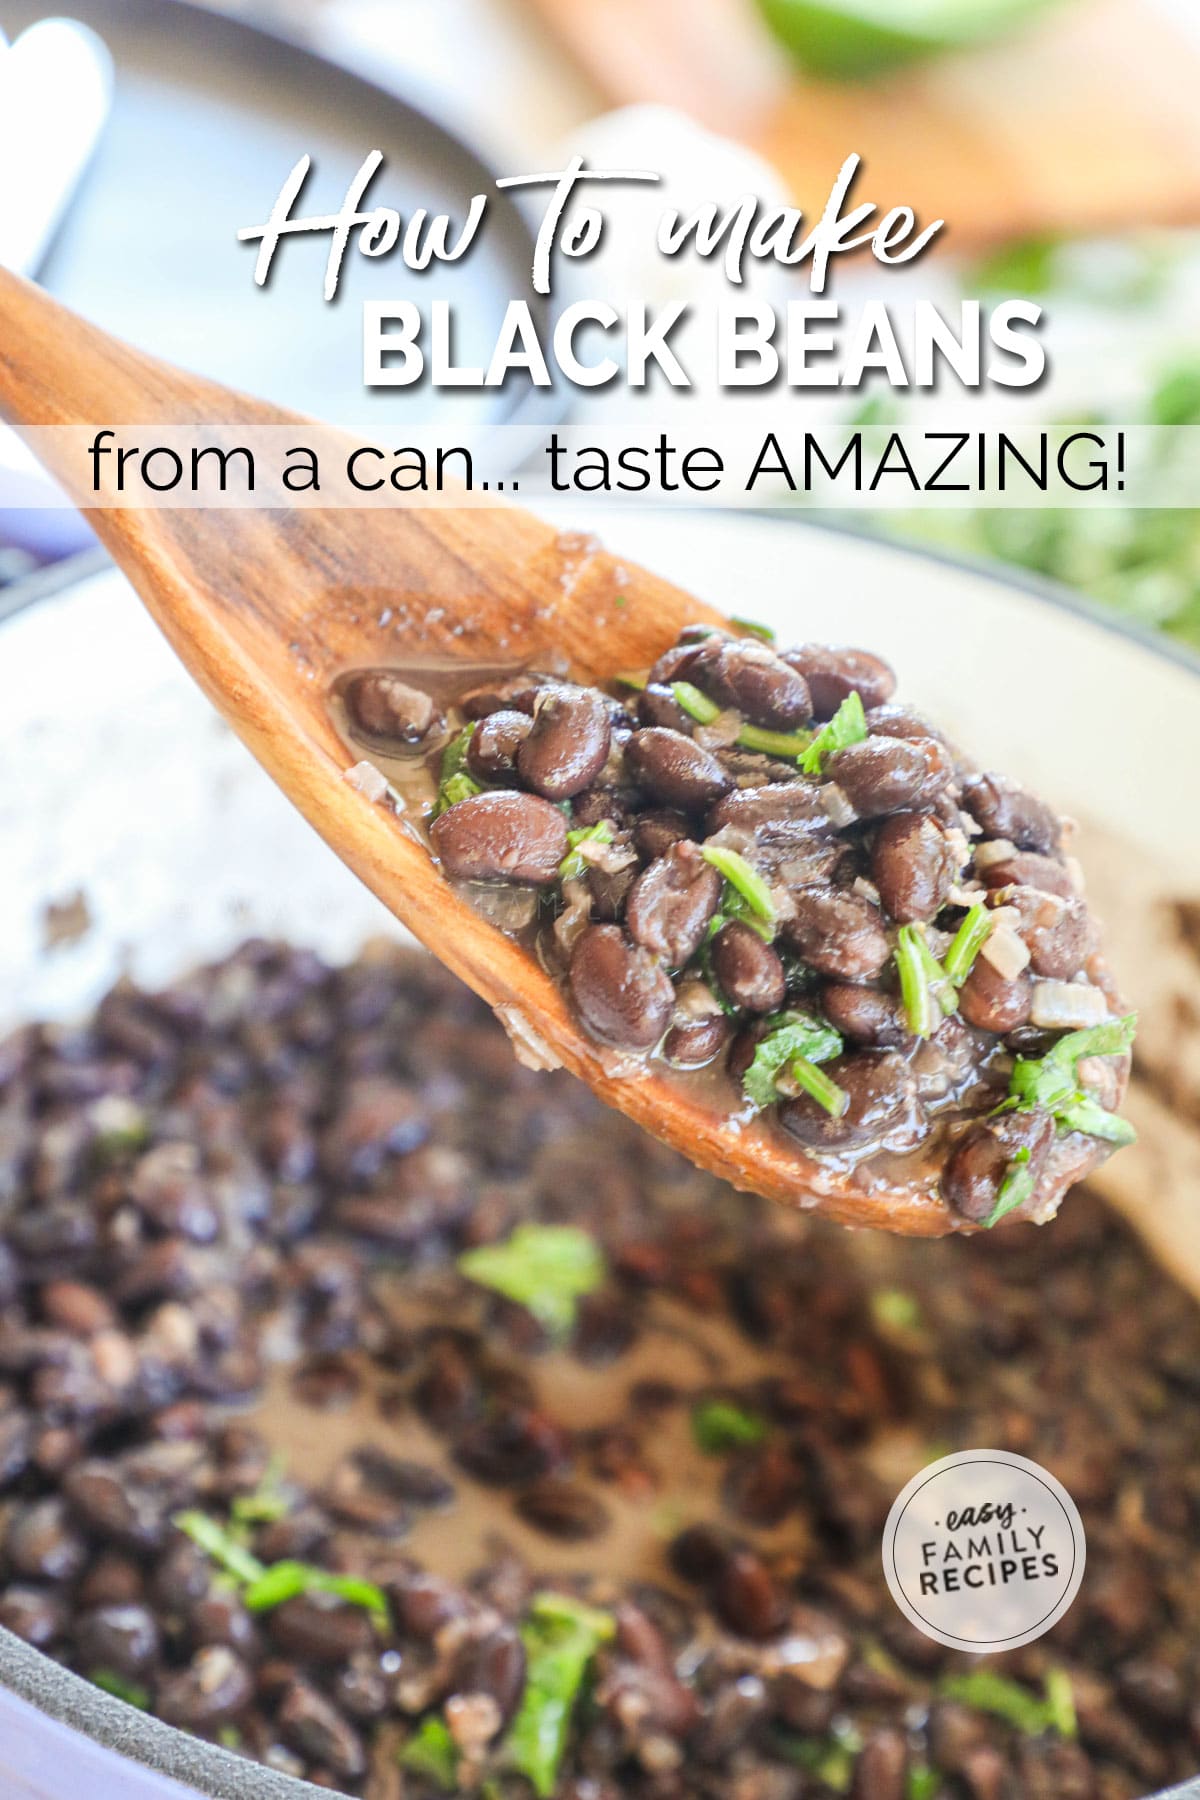 Spoon lifting canned black beans seasoned with cilantro from pot